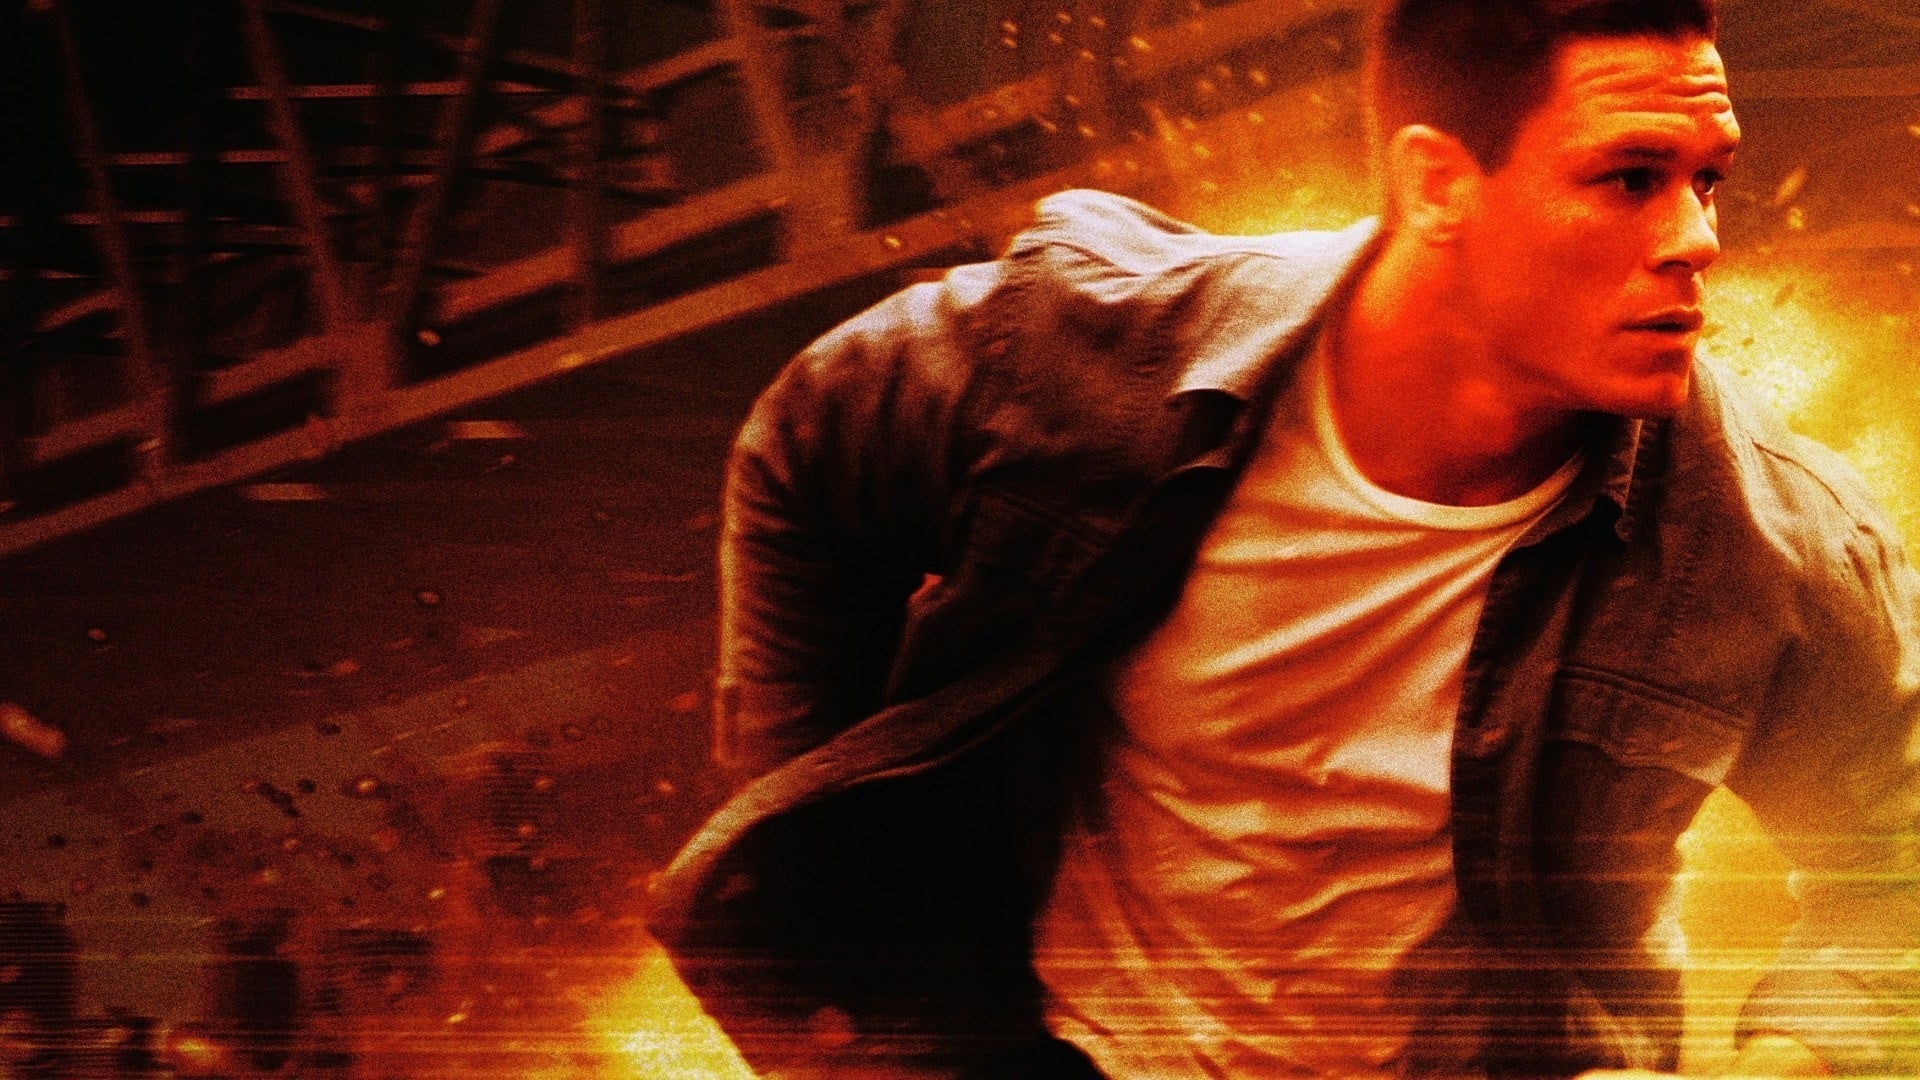 12 Rounds 2: Reloaded streaming: where to watch online?